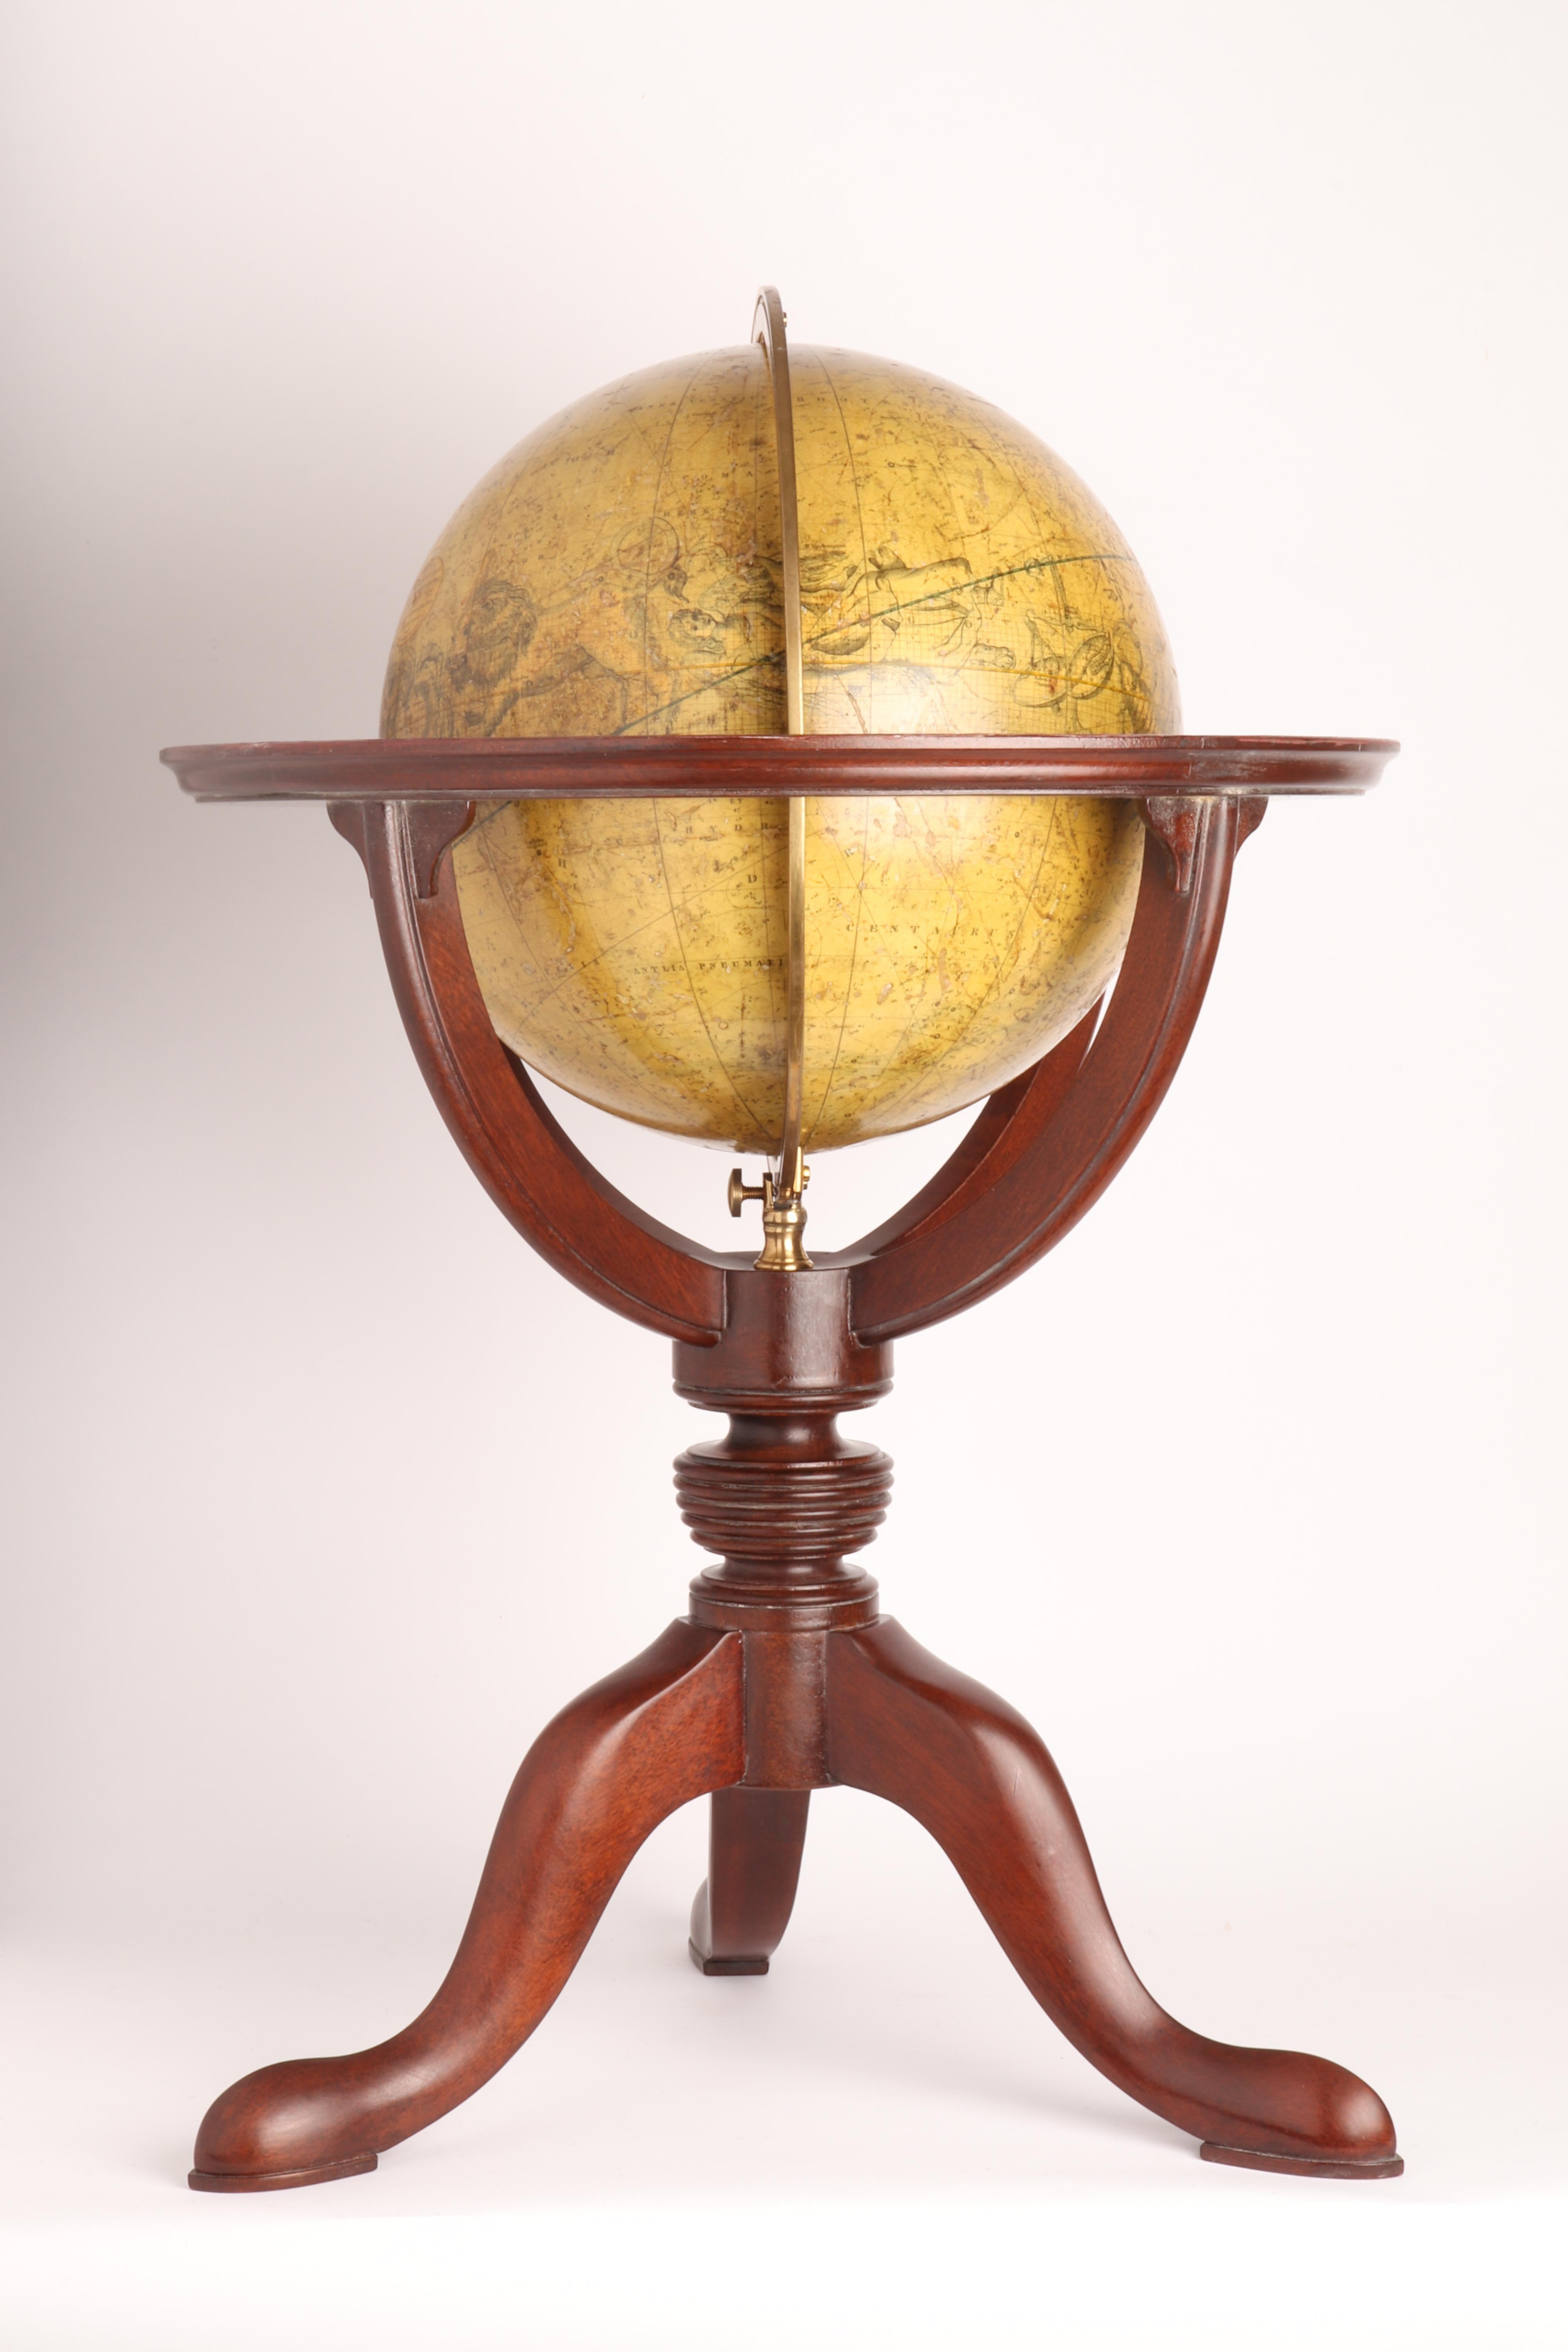 A celestial globe. Over a tripod-shaped foot that rises with a central element with moved profile, is connected to the brass meridian, which holds at the ends of the globe. The base is in mahogany wood. The globe is made out of paper-machè. Maker: